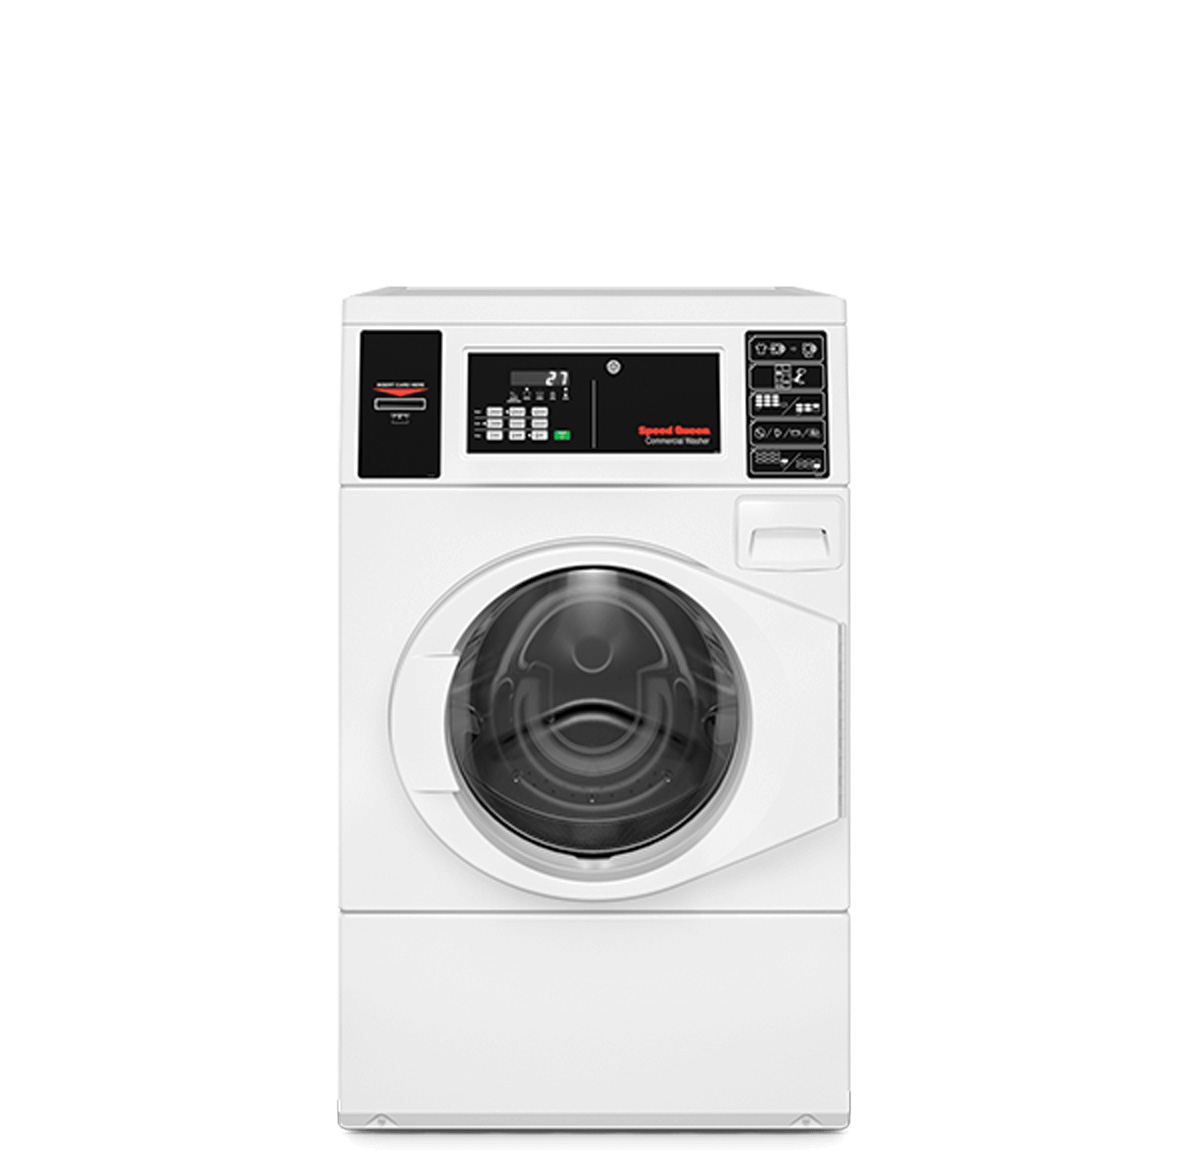 SPEED QUEEN 20LBS. Commercial Front Load Washing Machine MODEL:  SC20MD2YU60001 Serial No: 3120349775